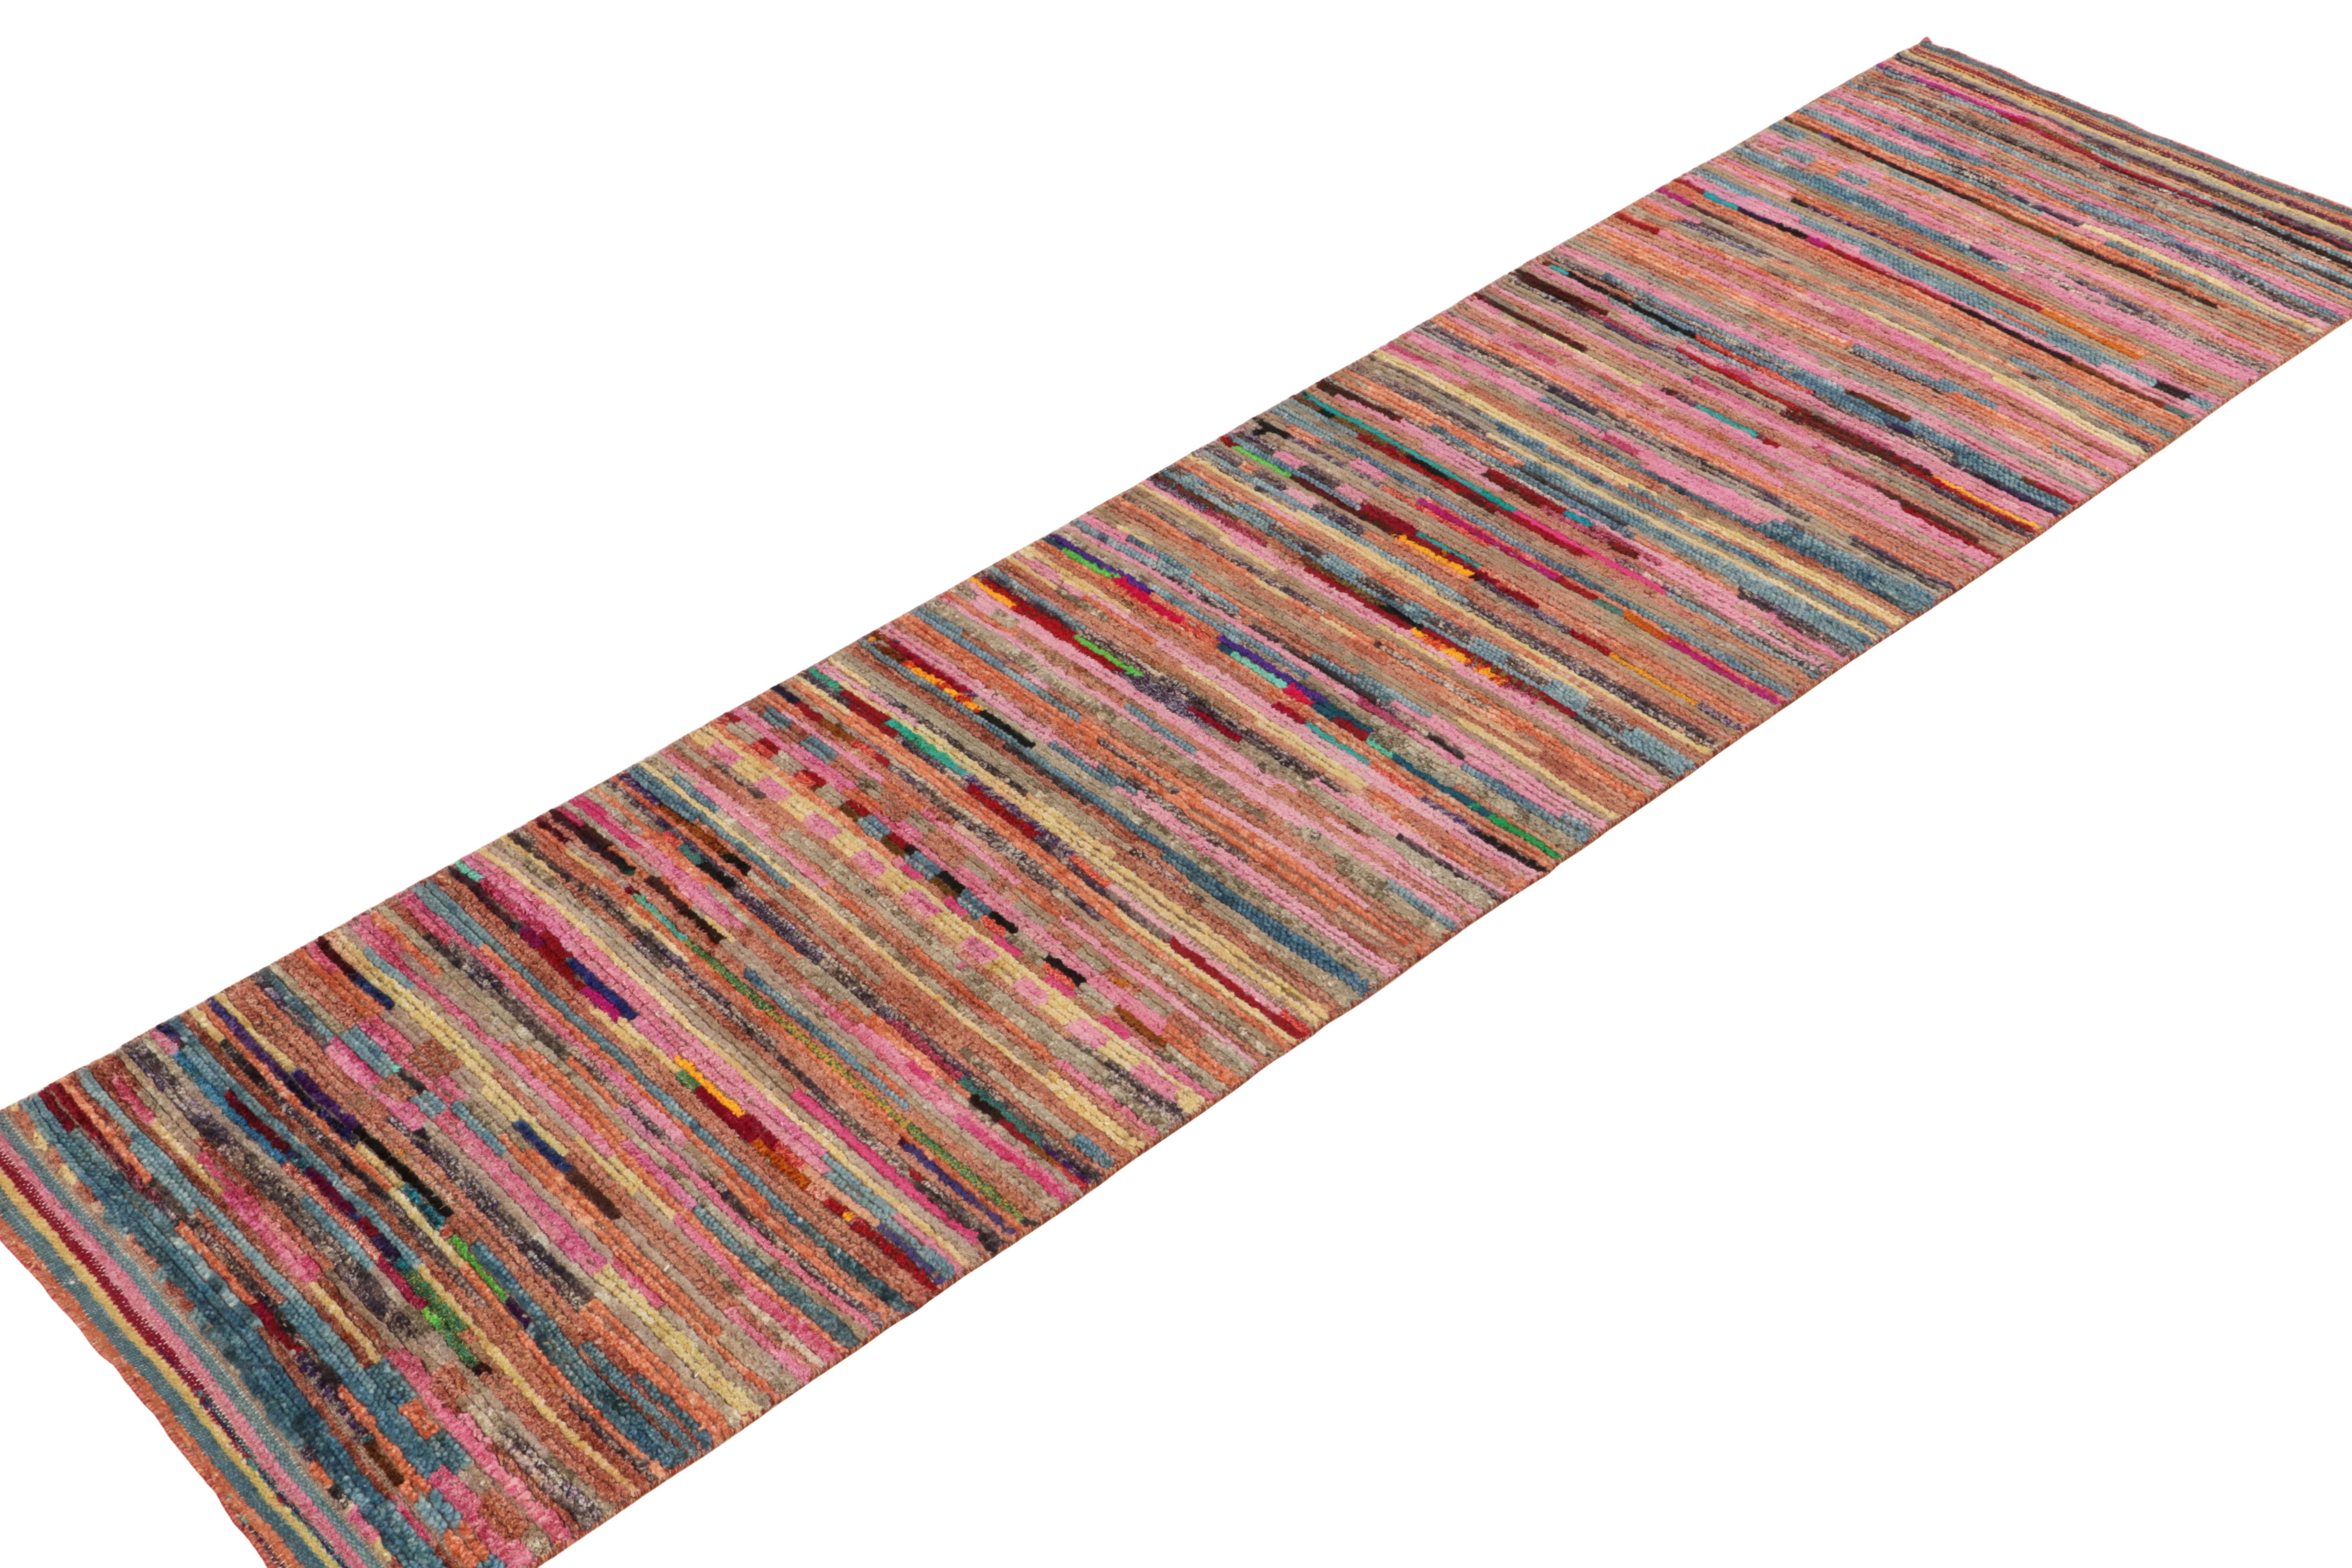 Indian Rug & Kilim's Moroccan Tribal Style Runner in Pink, Multicolor Stripe Patterns For Sale